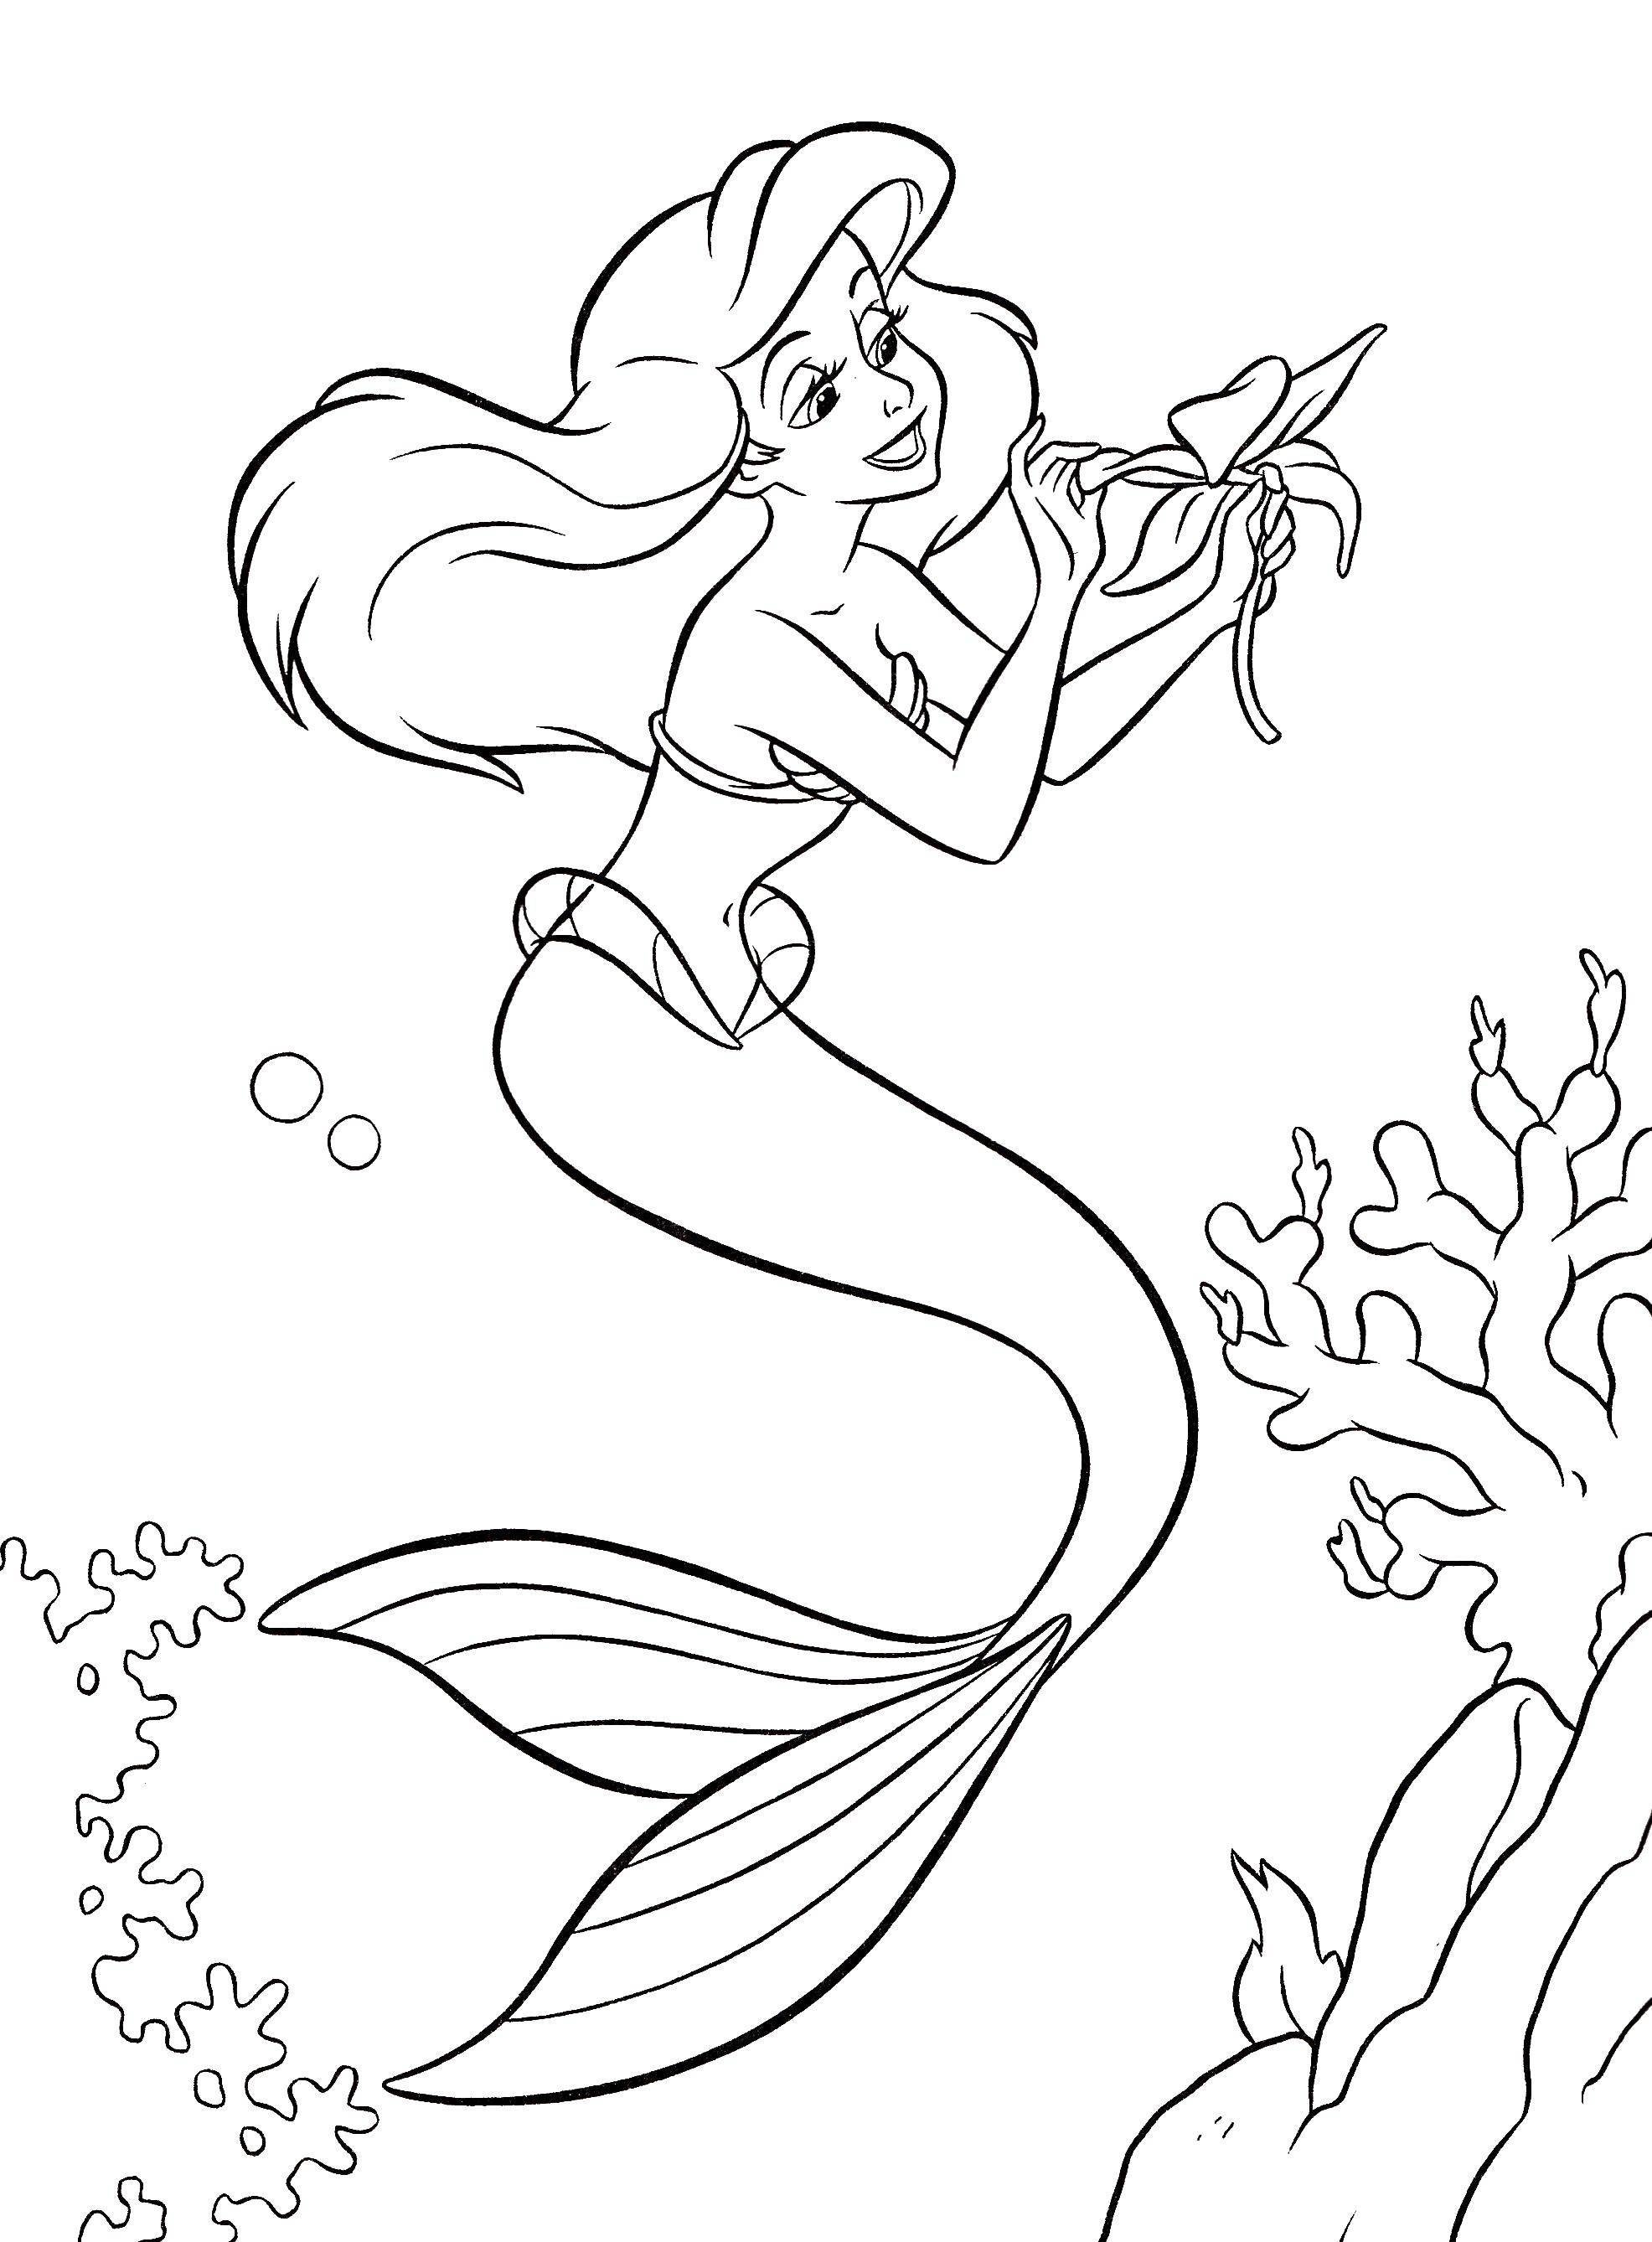 Coloring Ariel with flower. Category The little mermaid. Tags:  the little mermaid, Ariel, flower.